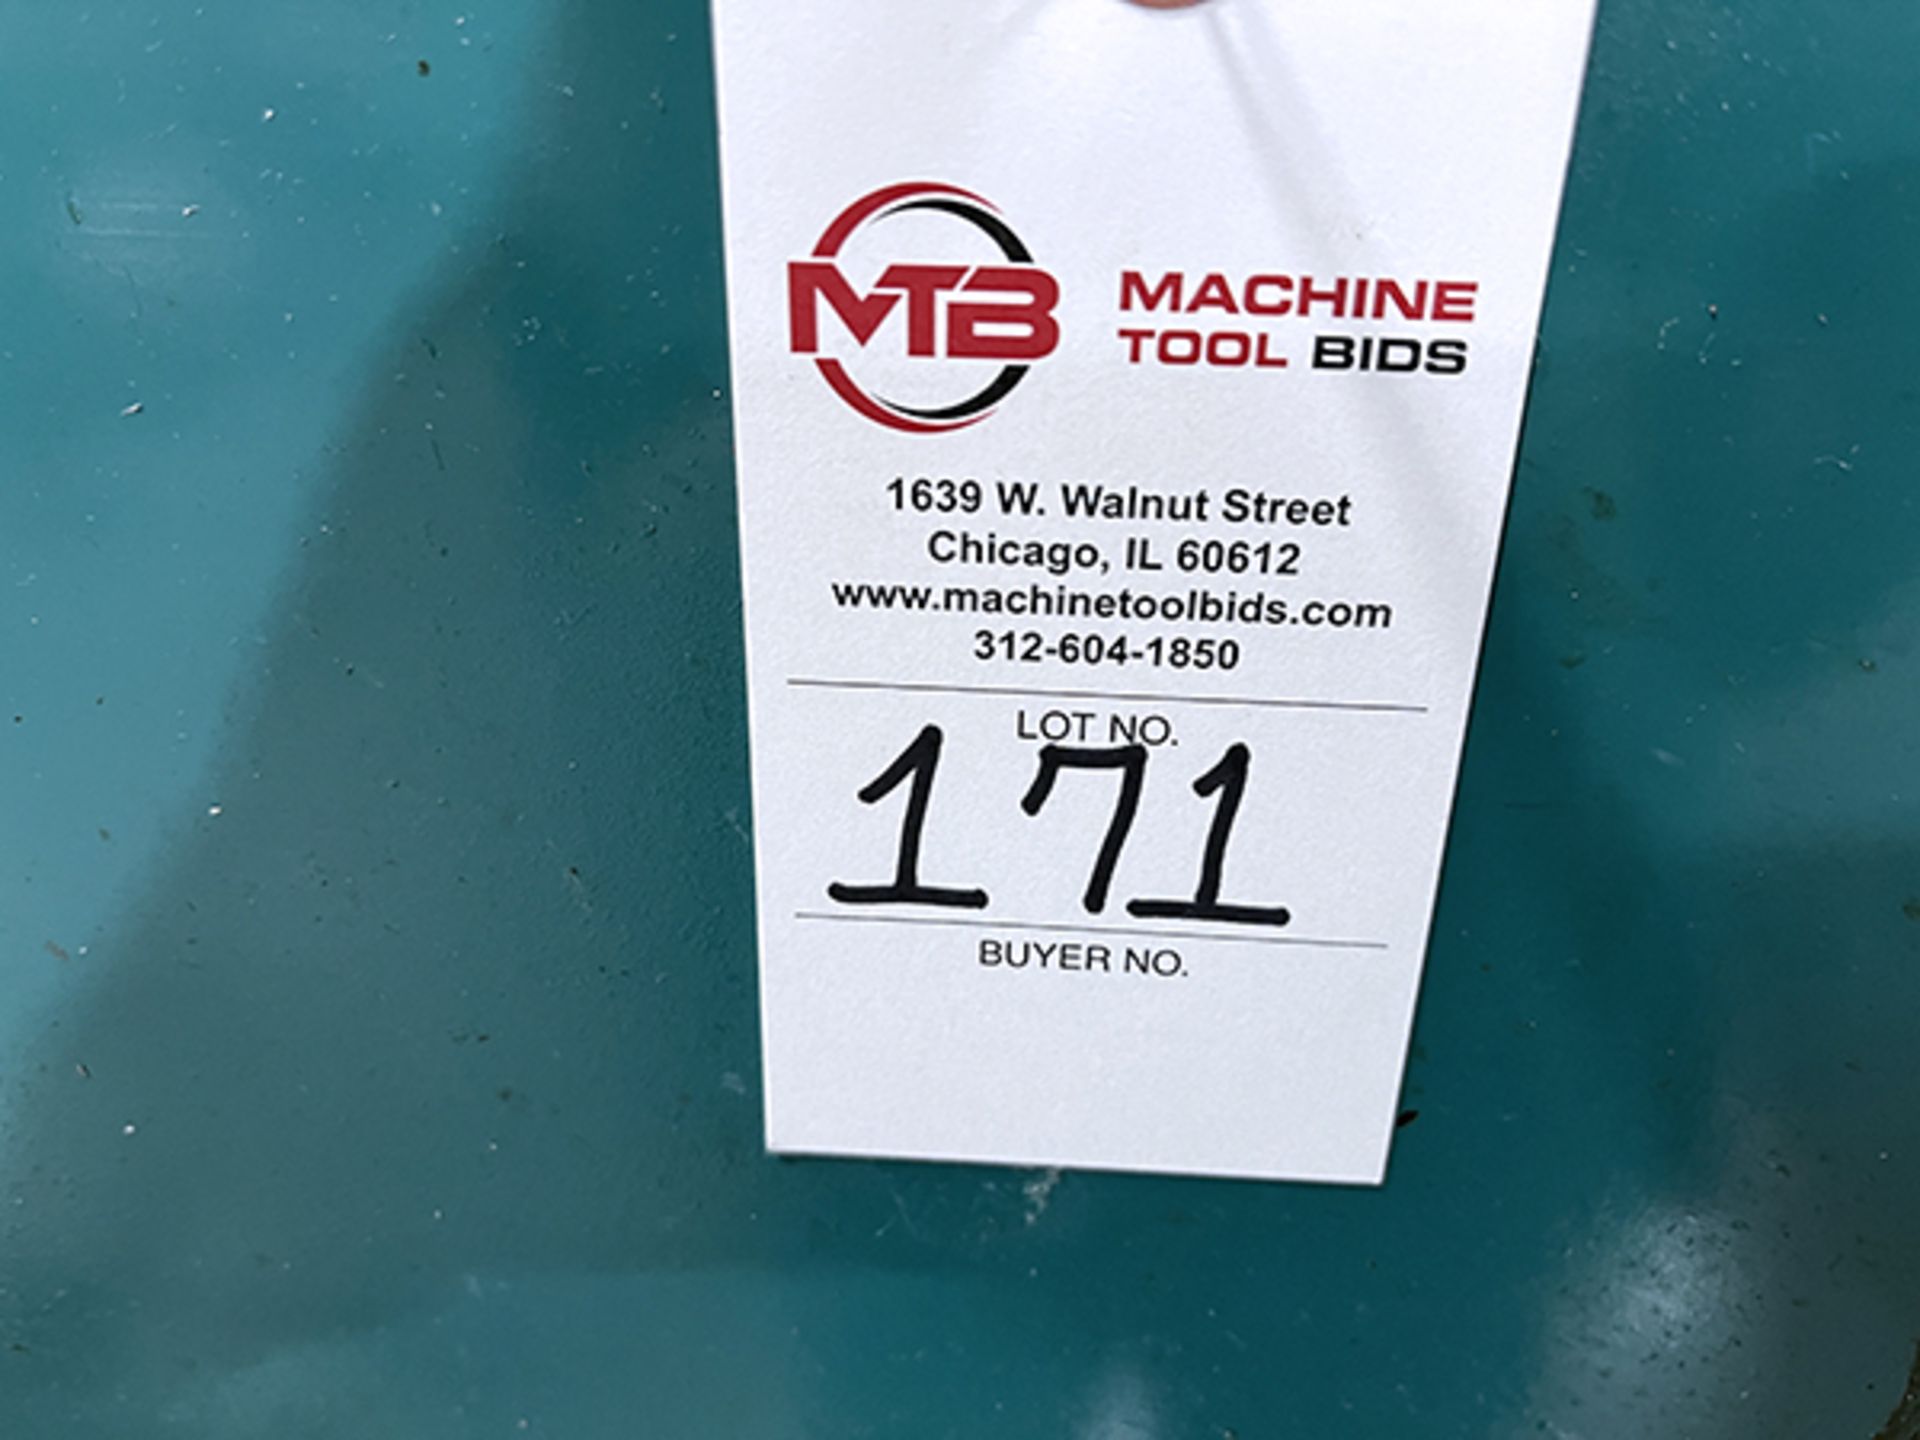 Matsuura MC 100V-DC CNC Twin Spindle Vertical Machining Center - Image 15 of 15